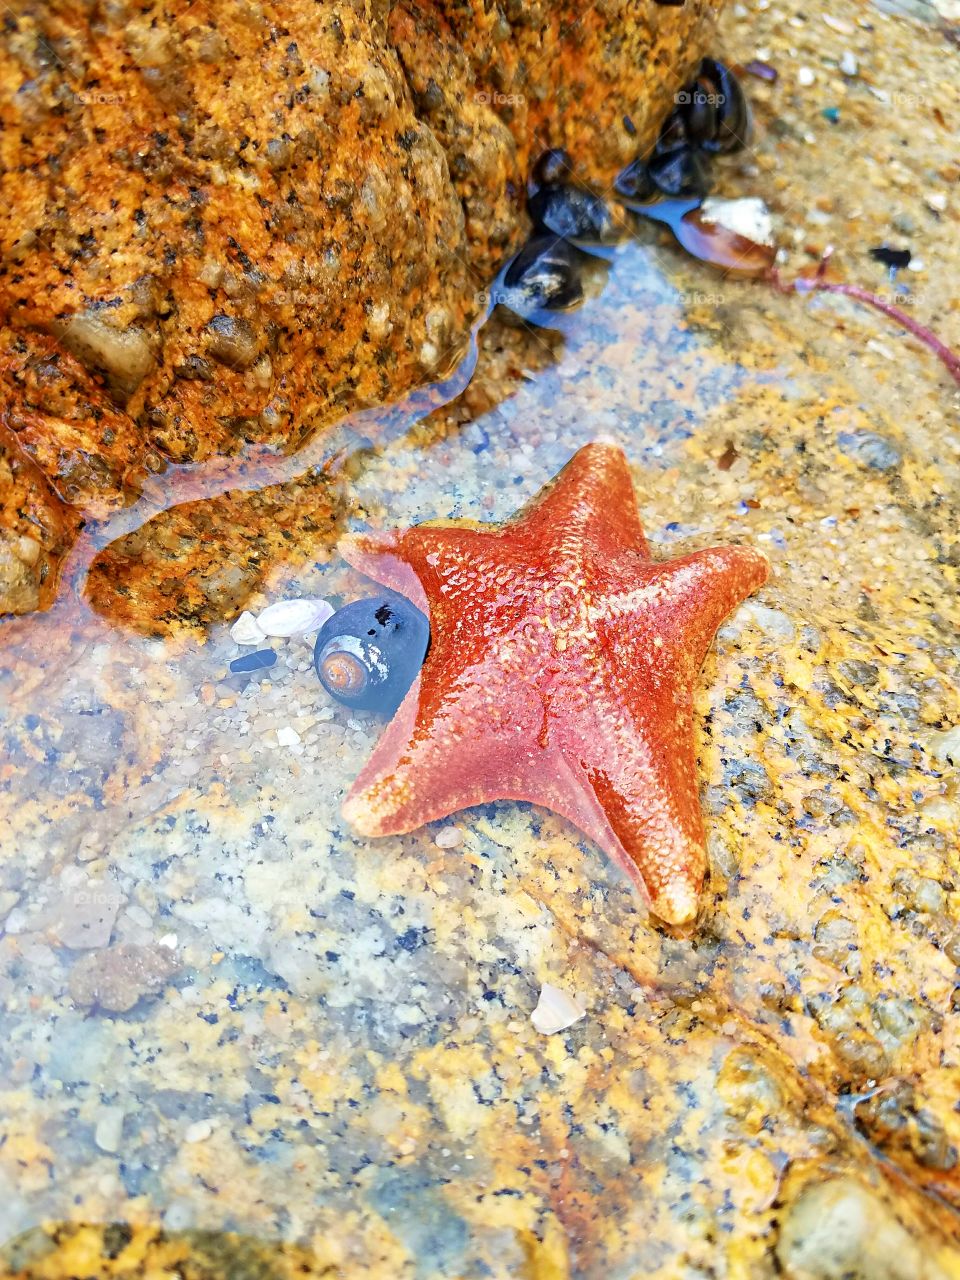 twinkle twinkle little starfish, how I wonder what you are fish